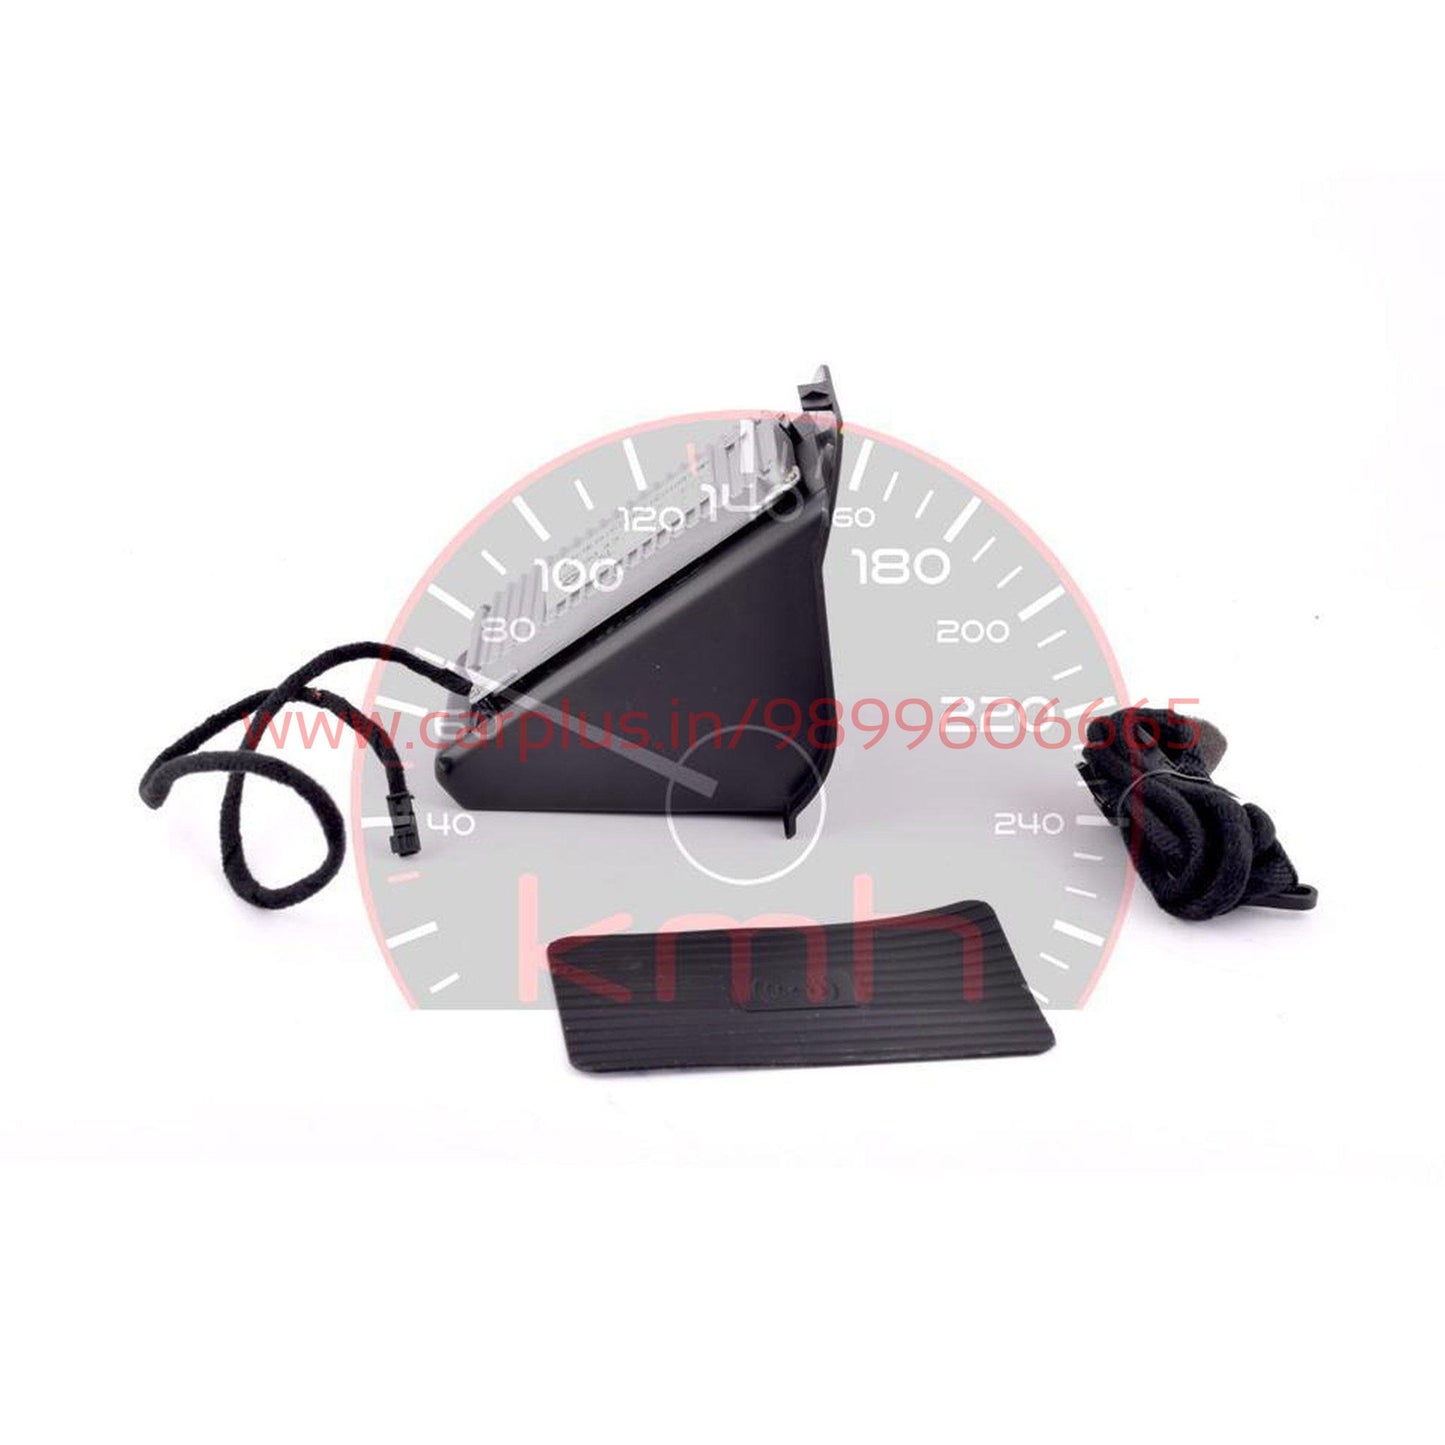 
                  
                    KMH Wireless Charger For Mercedes GLA KMH-WIRELESS CHARGER WIRELESS CHARGER.
                  
                